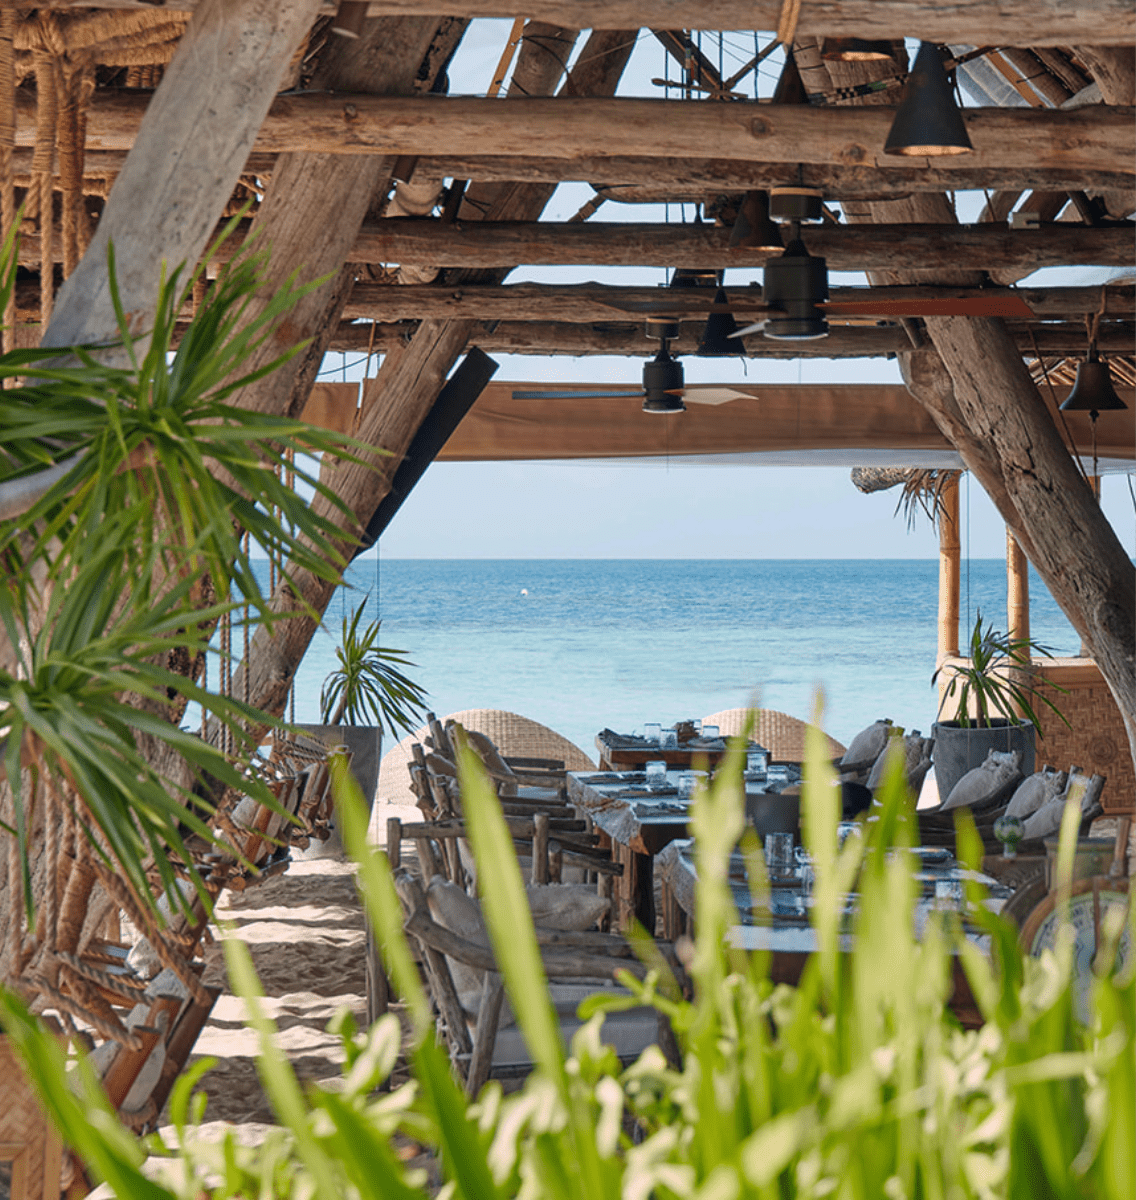 The Boathouse, beach bar and restaurant at Bawah Reserve, Indonesia.